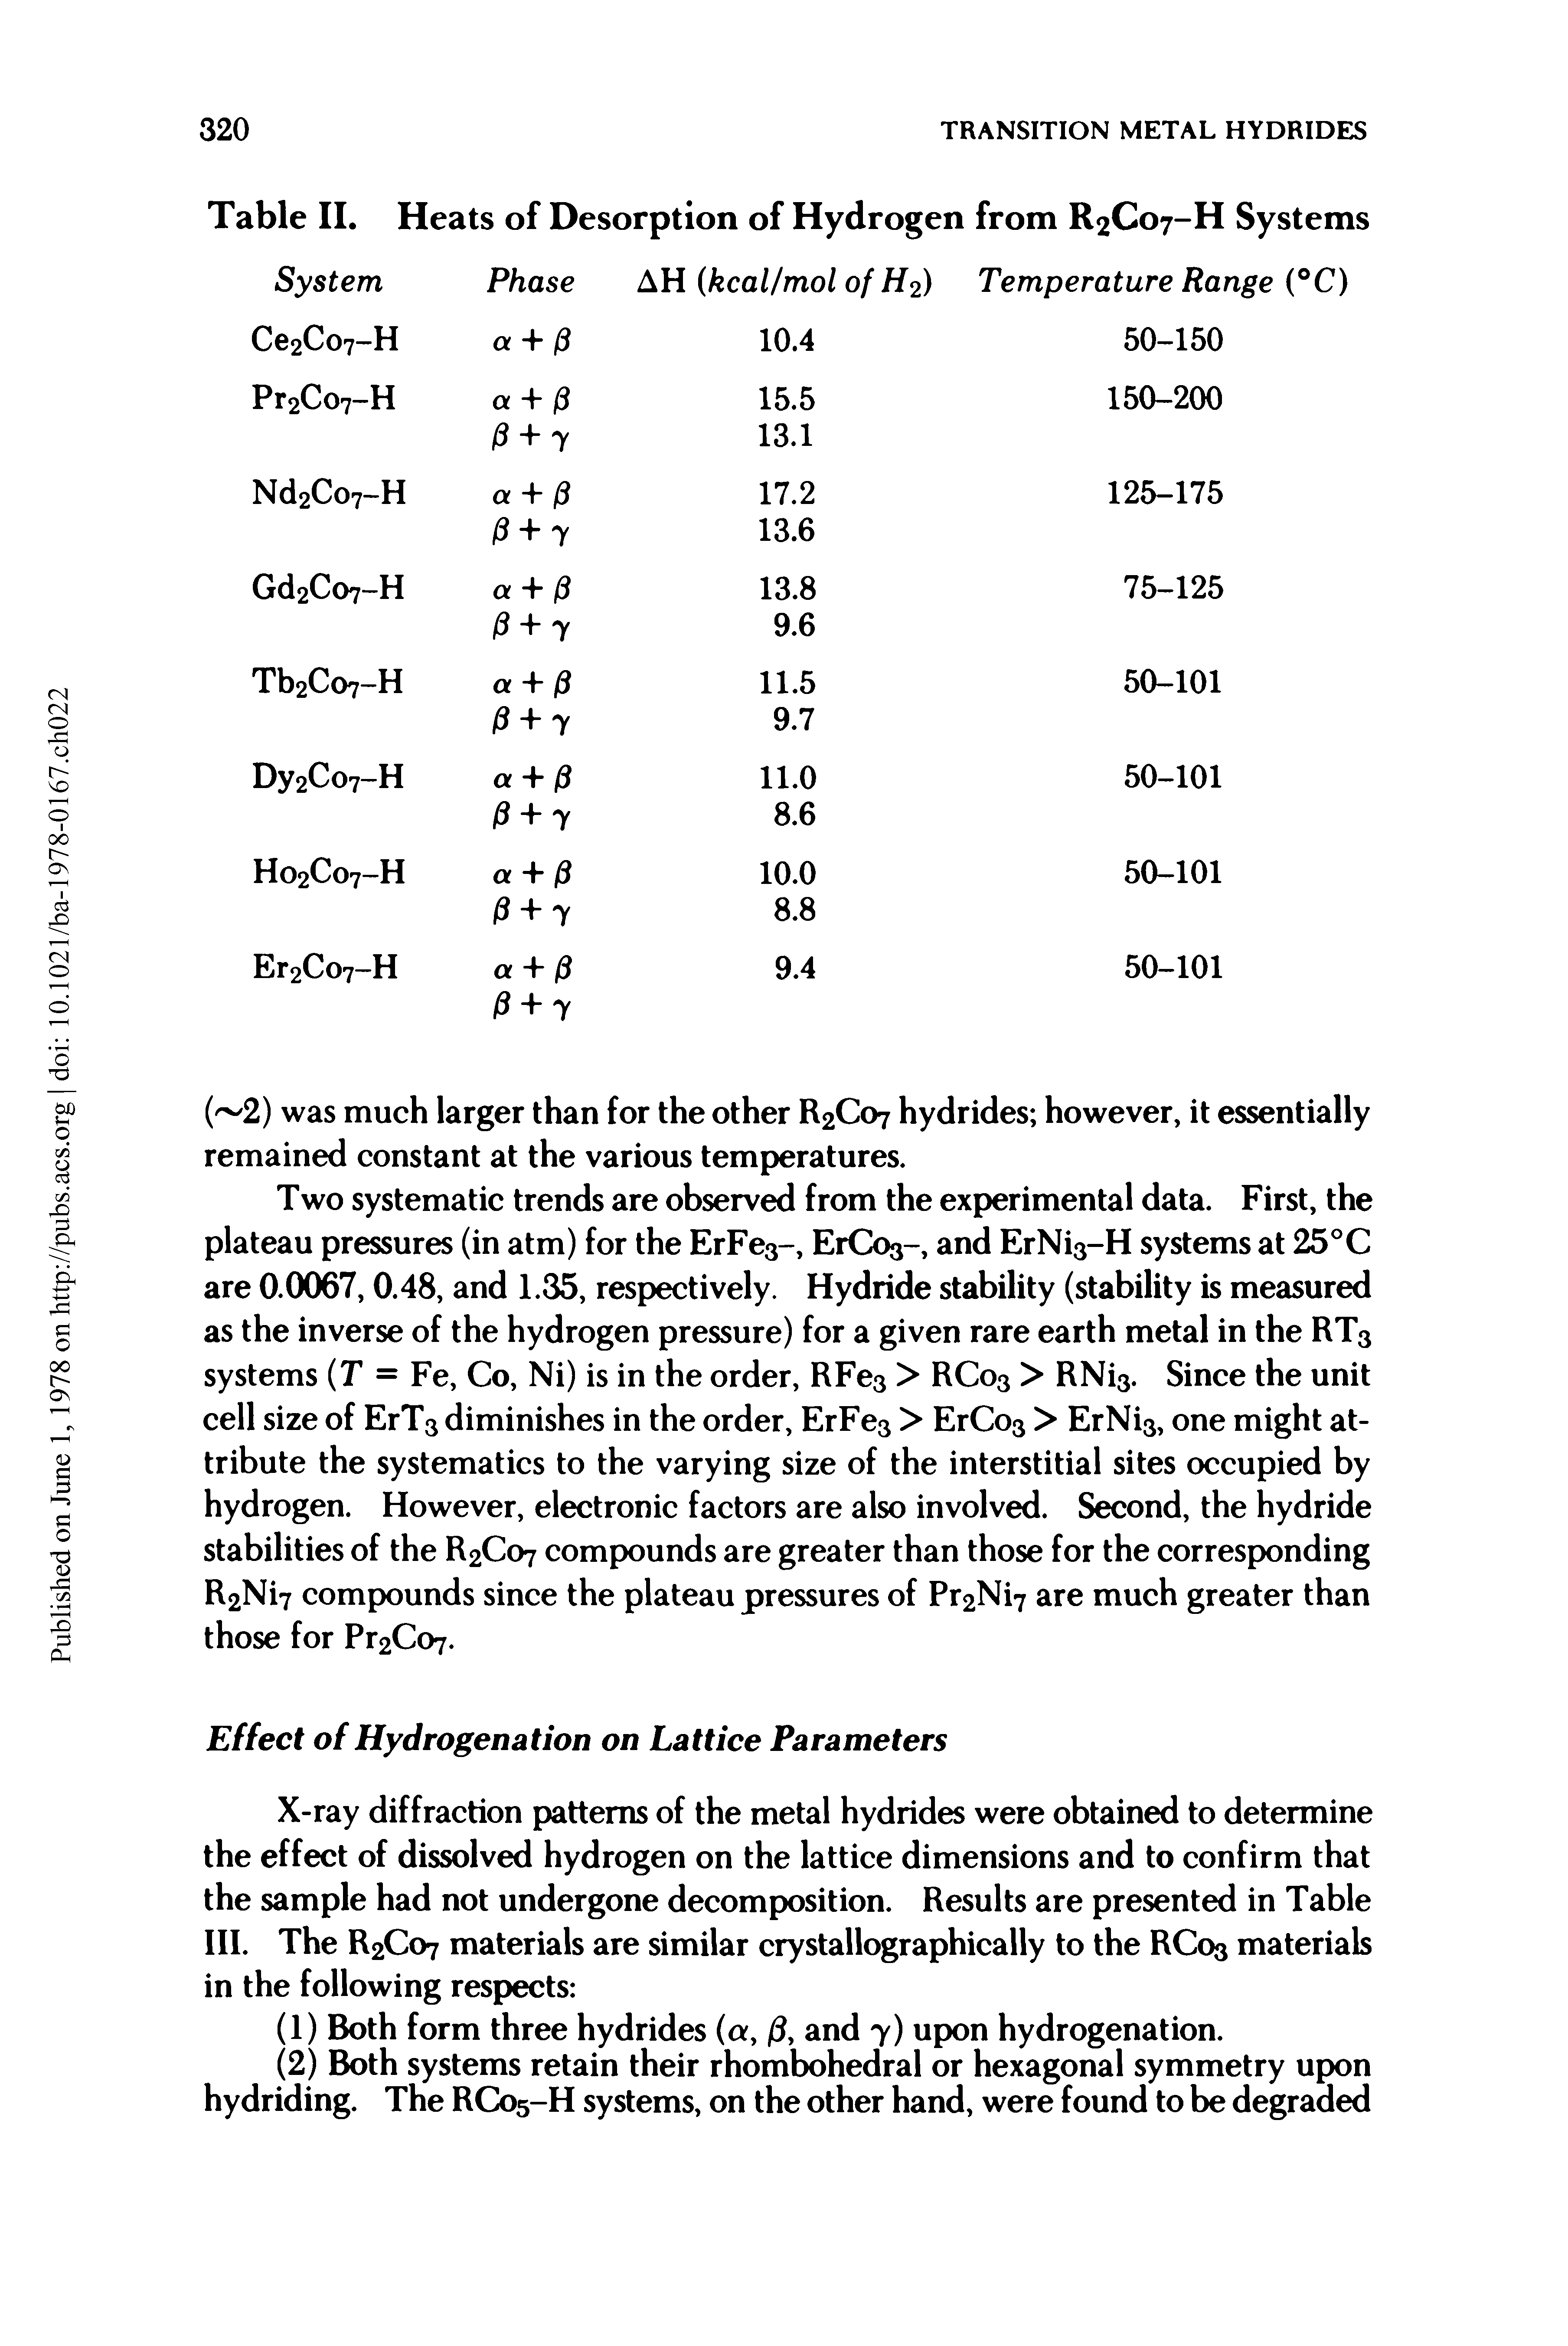 Table II. Heats of Desorption of Hydrogen from R2C07-H Systems...